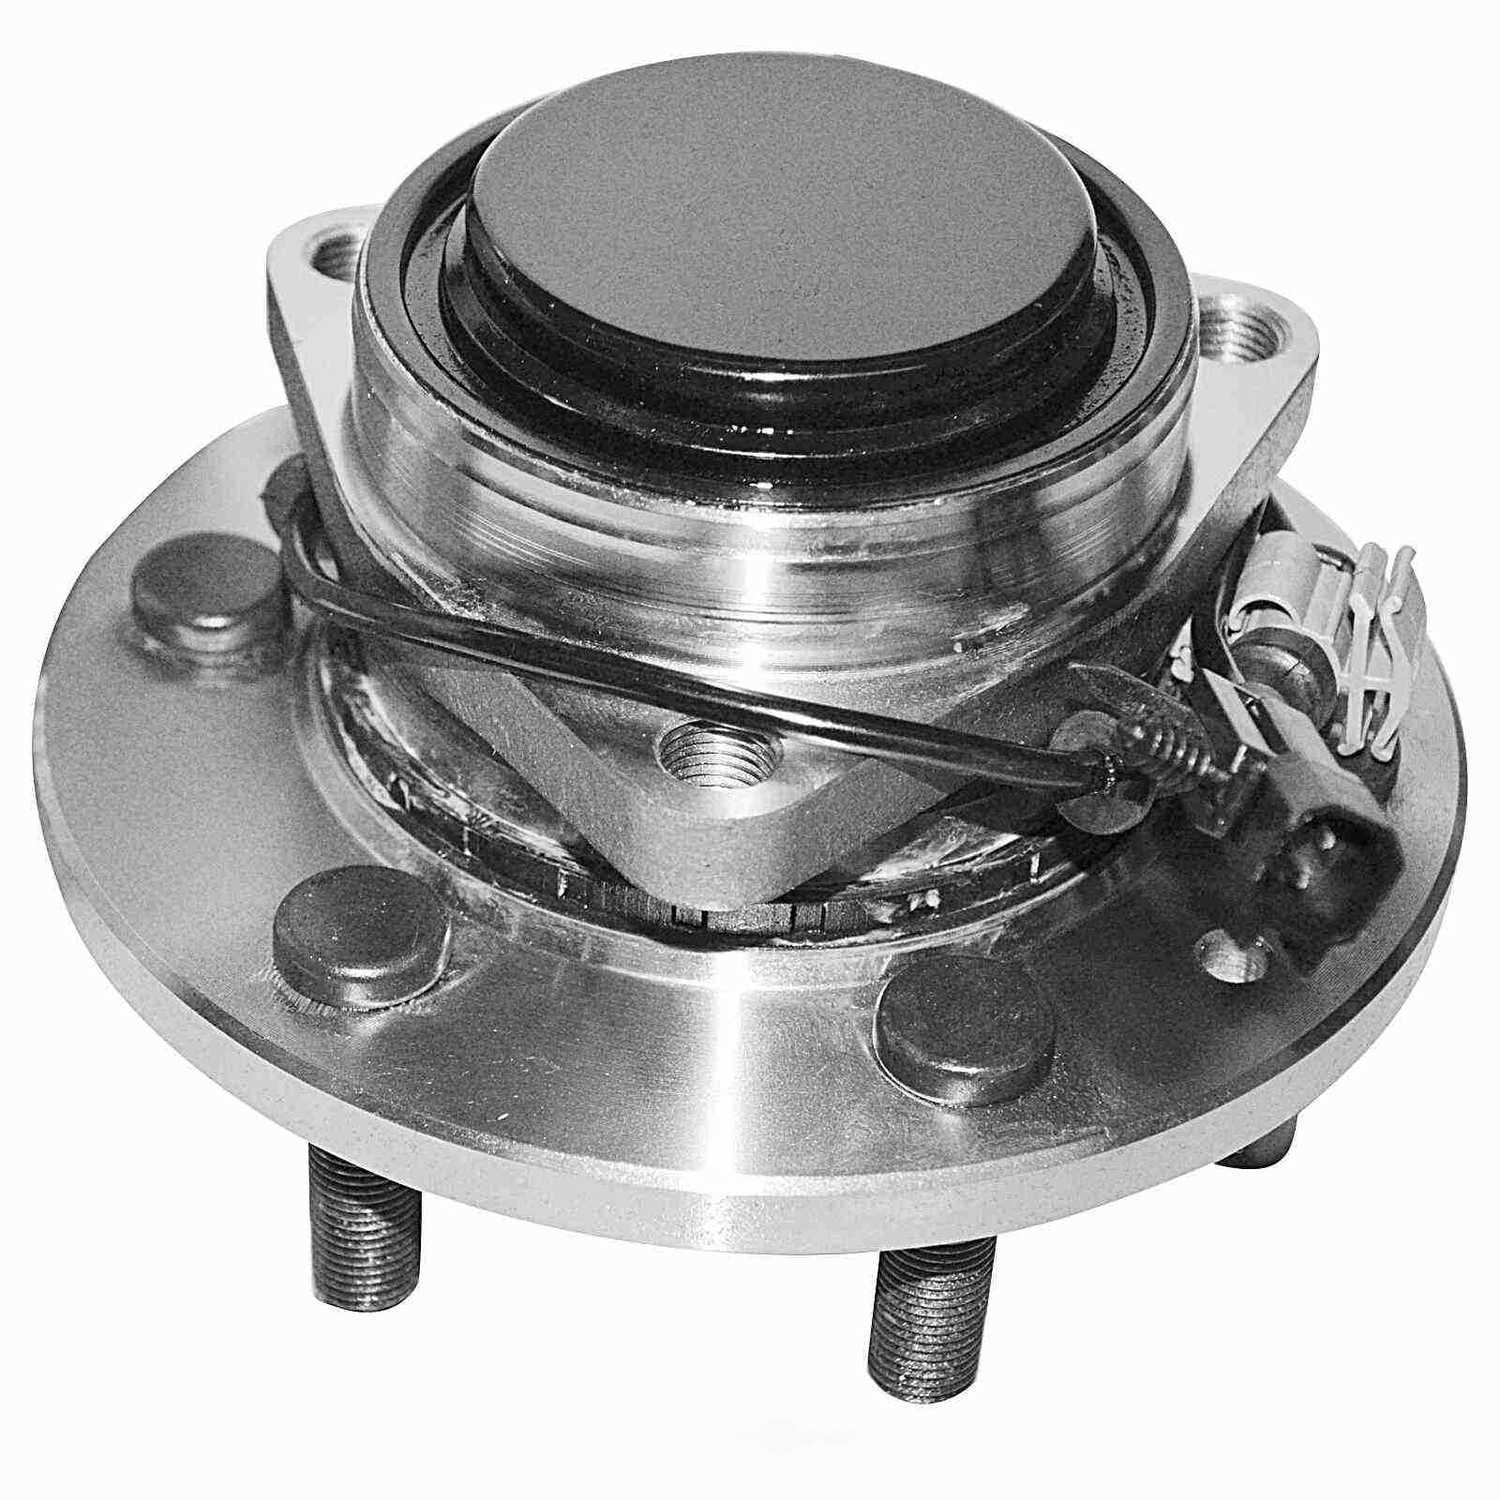 GSP NORTH AMERICA INC. - GSP Wheel Bearing Assembly (Front) - AD8 106159